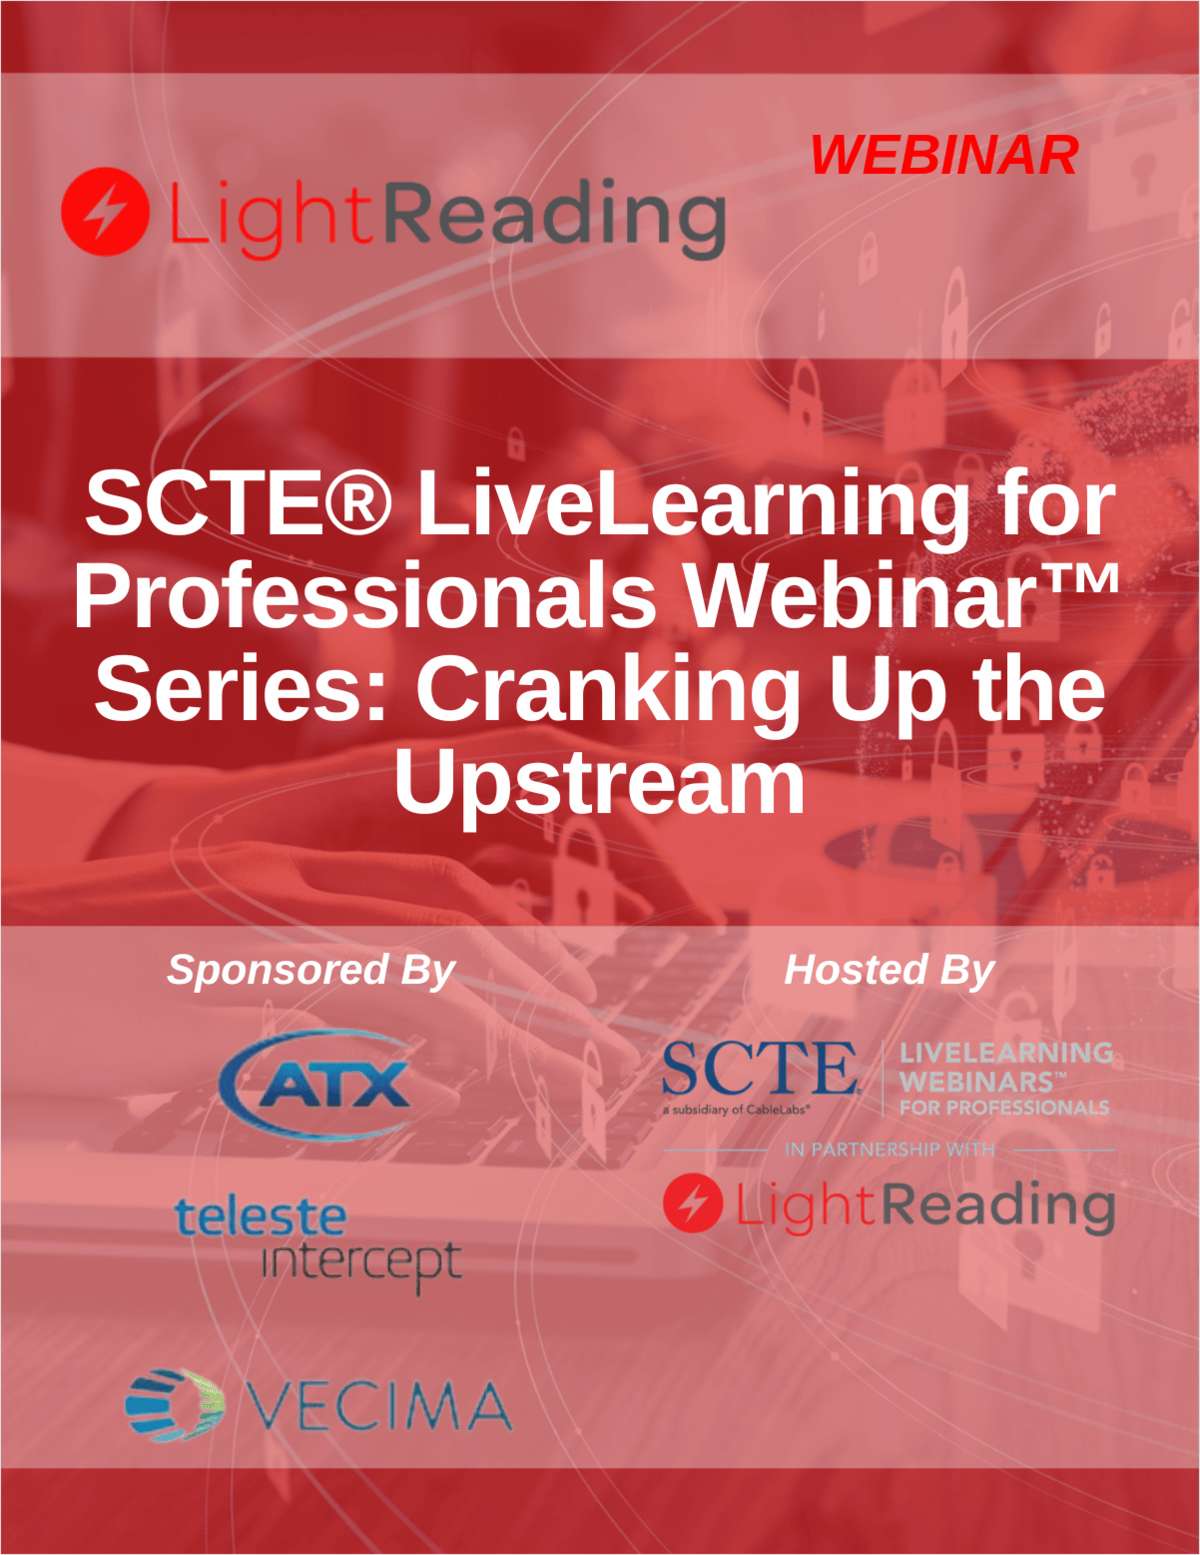 SCTE® LiveLearning for Professionals Webinar™ Series: Cranking Up the Upstream